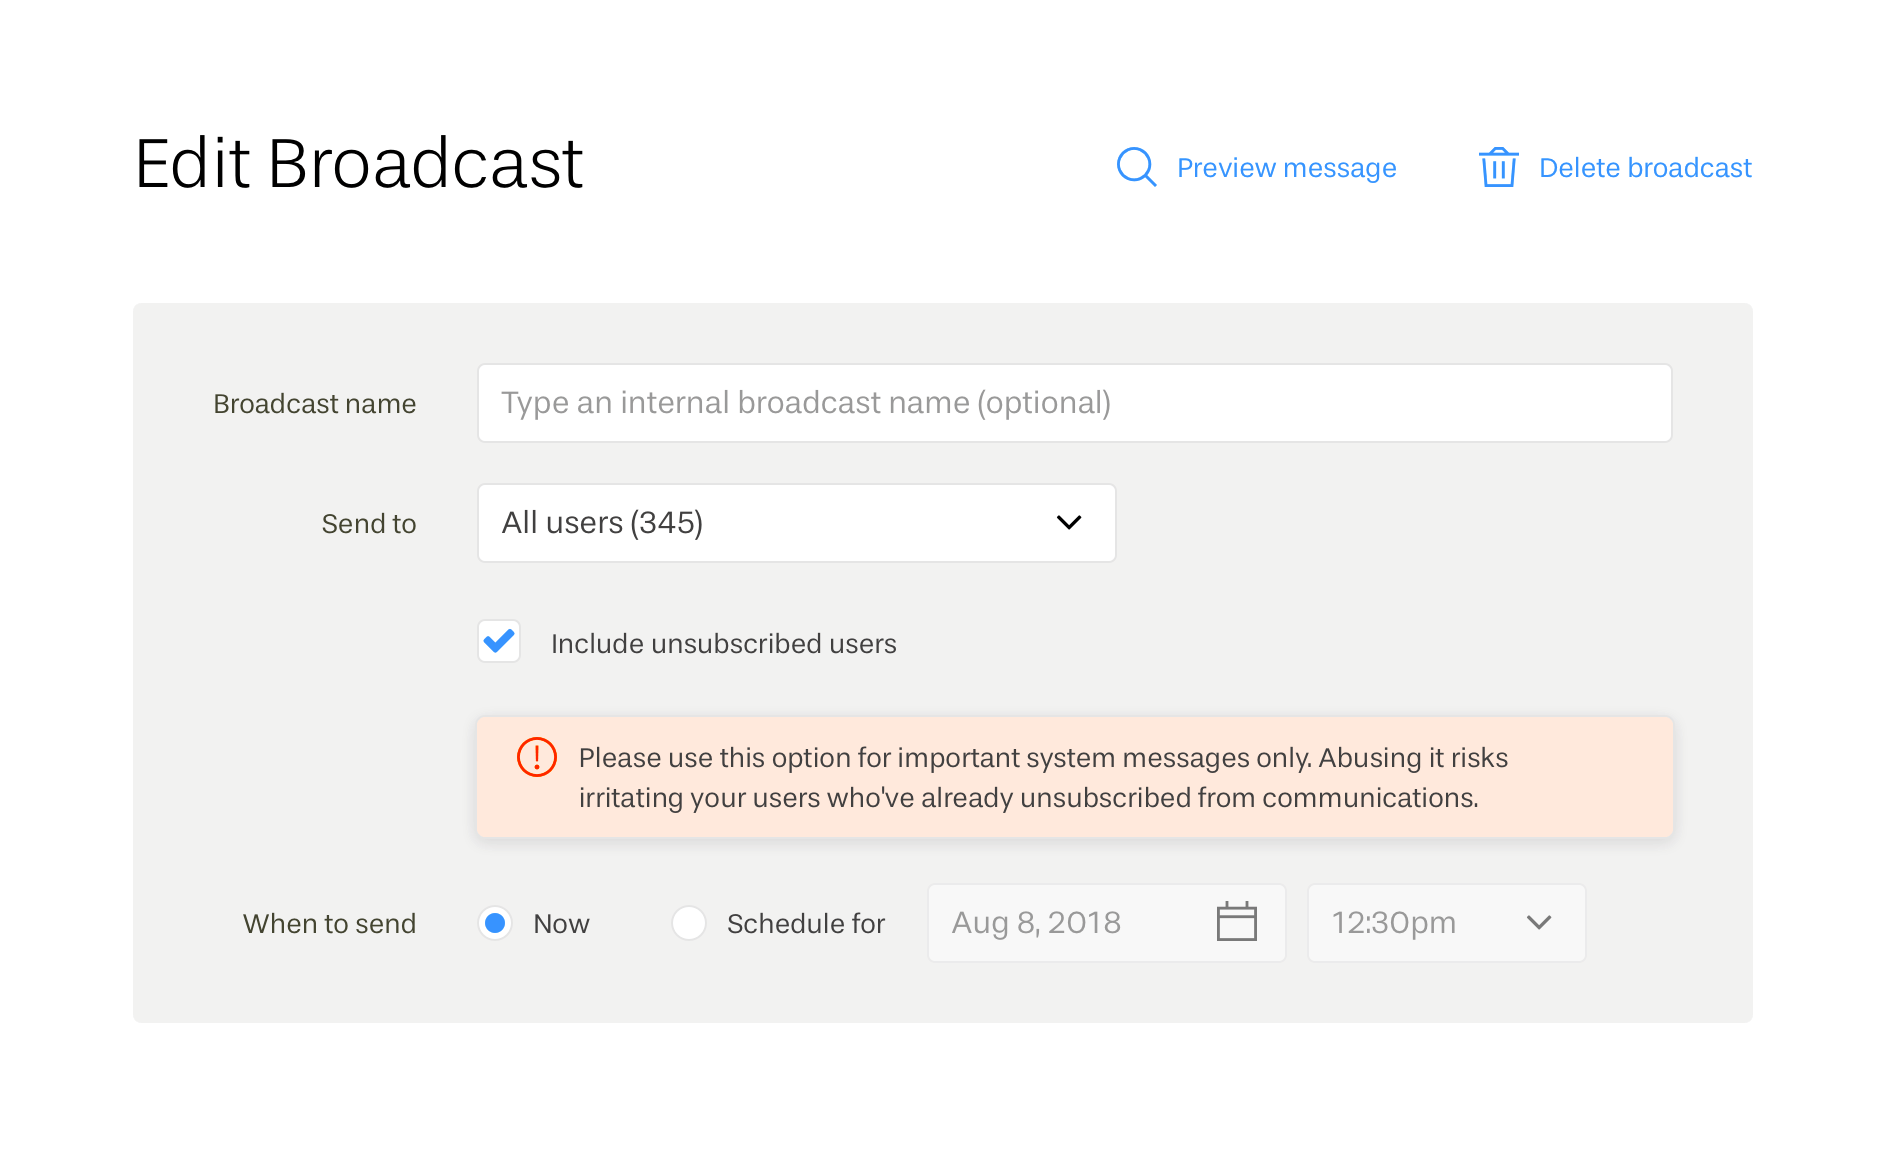 Screenshot of editing broadcast settings to include unsubscribed users